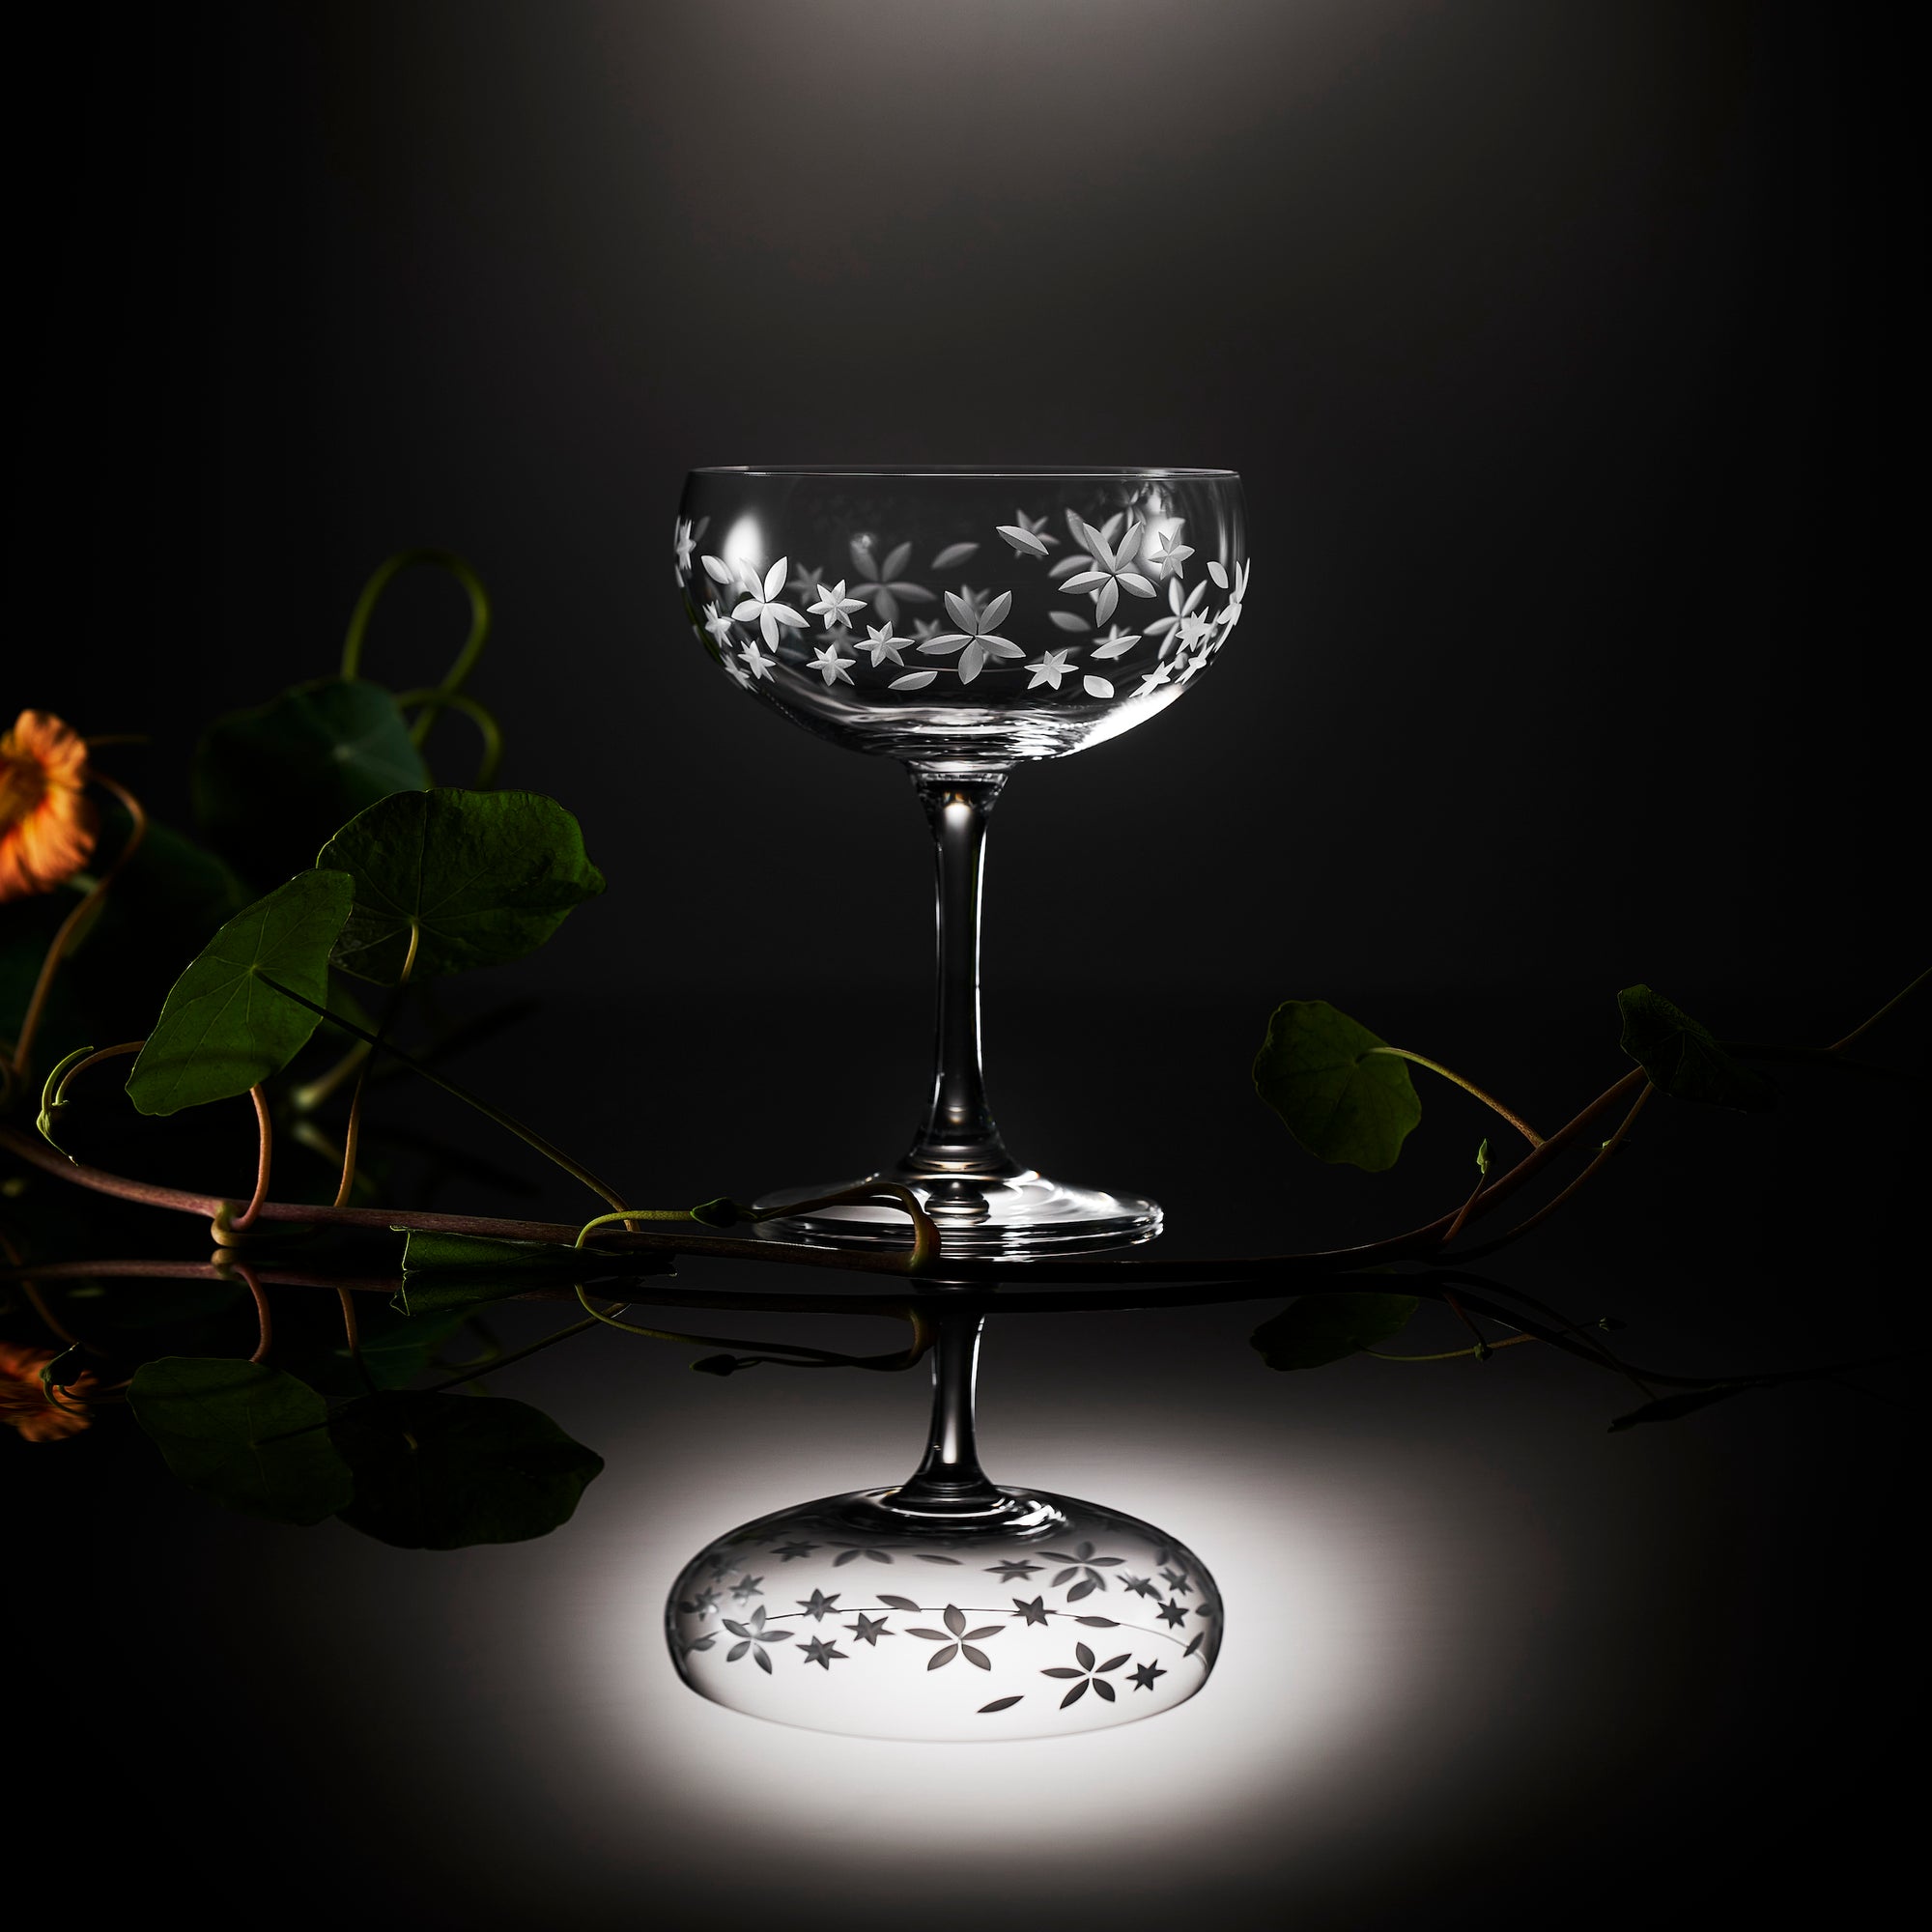 Chatham Bloom coupe cocktail glasses, etched floral design in lead-free crystal by Caskata.